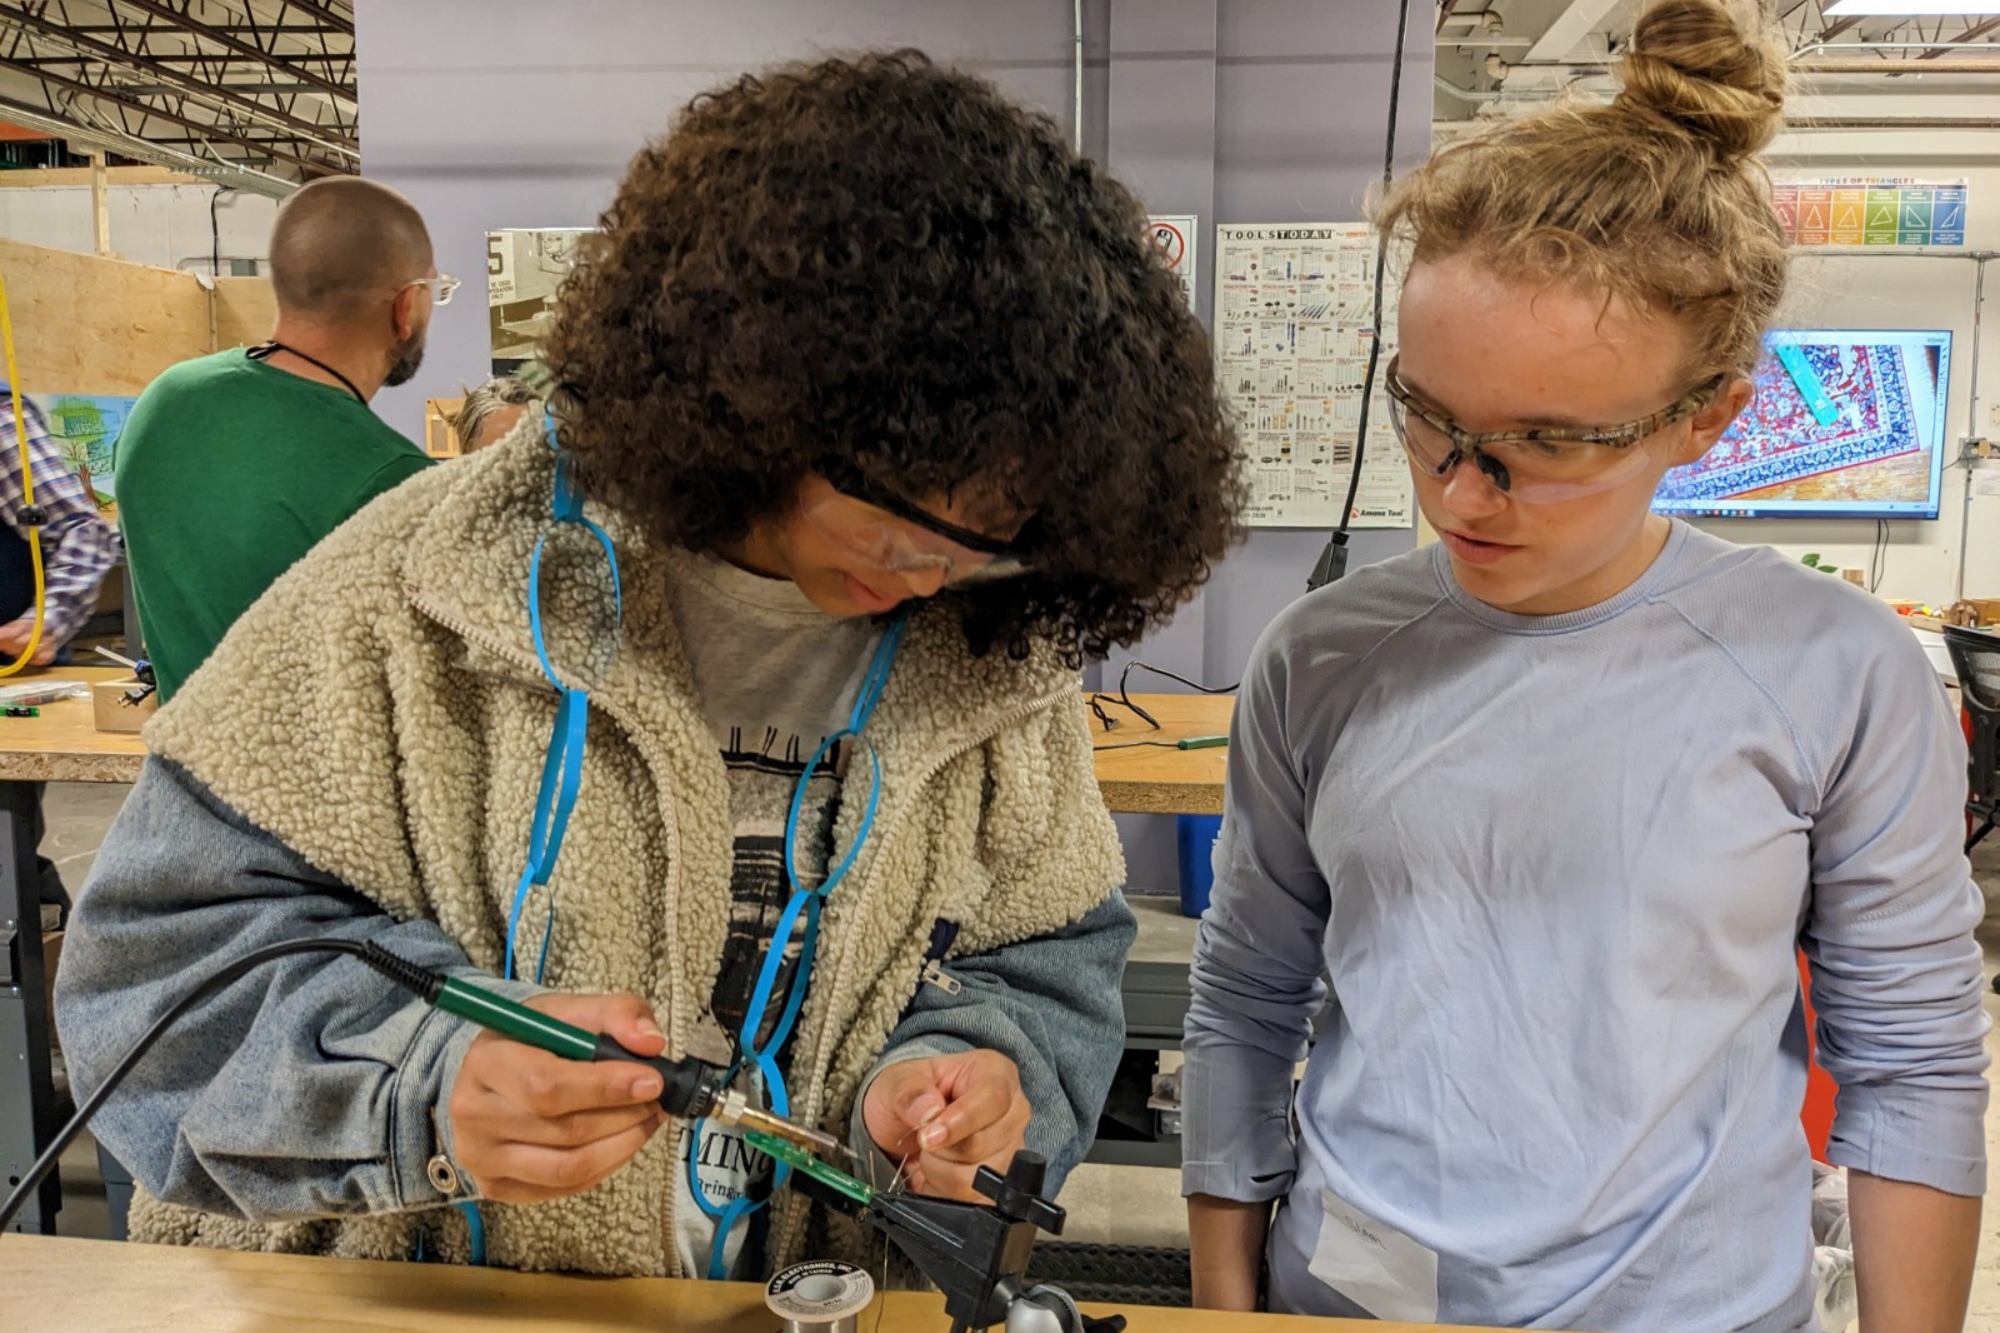 Middle schoolers try new things at Career Challenge Day